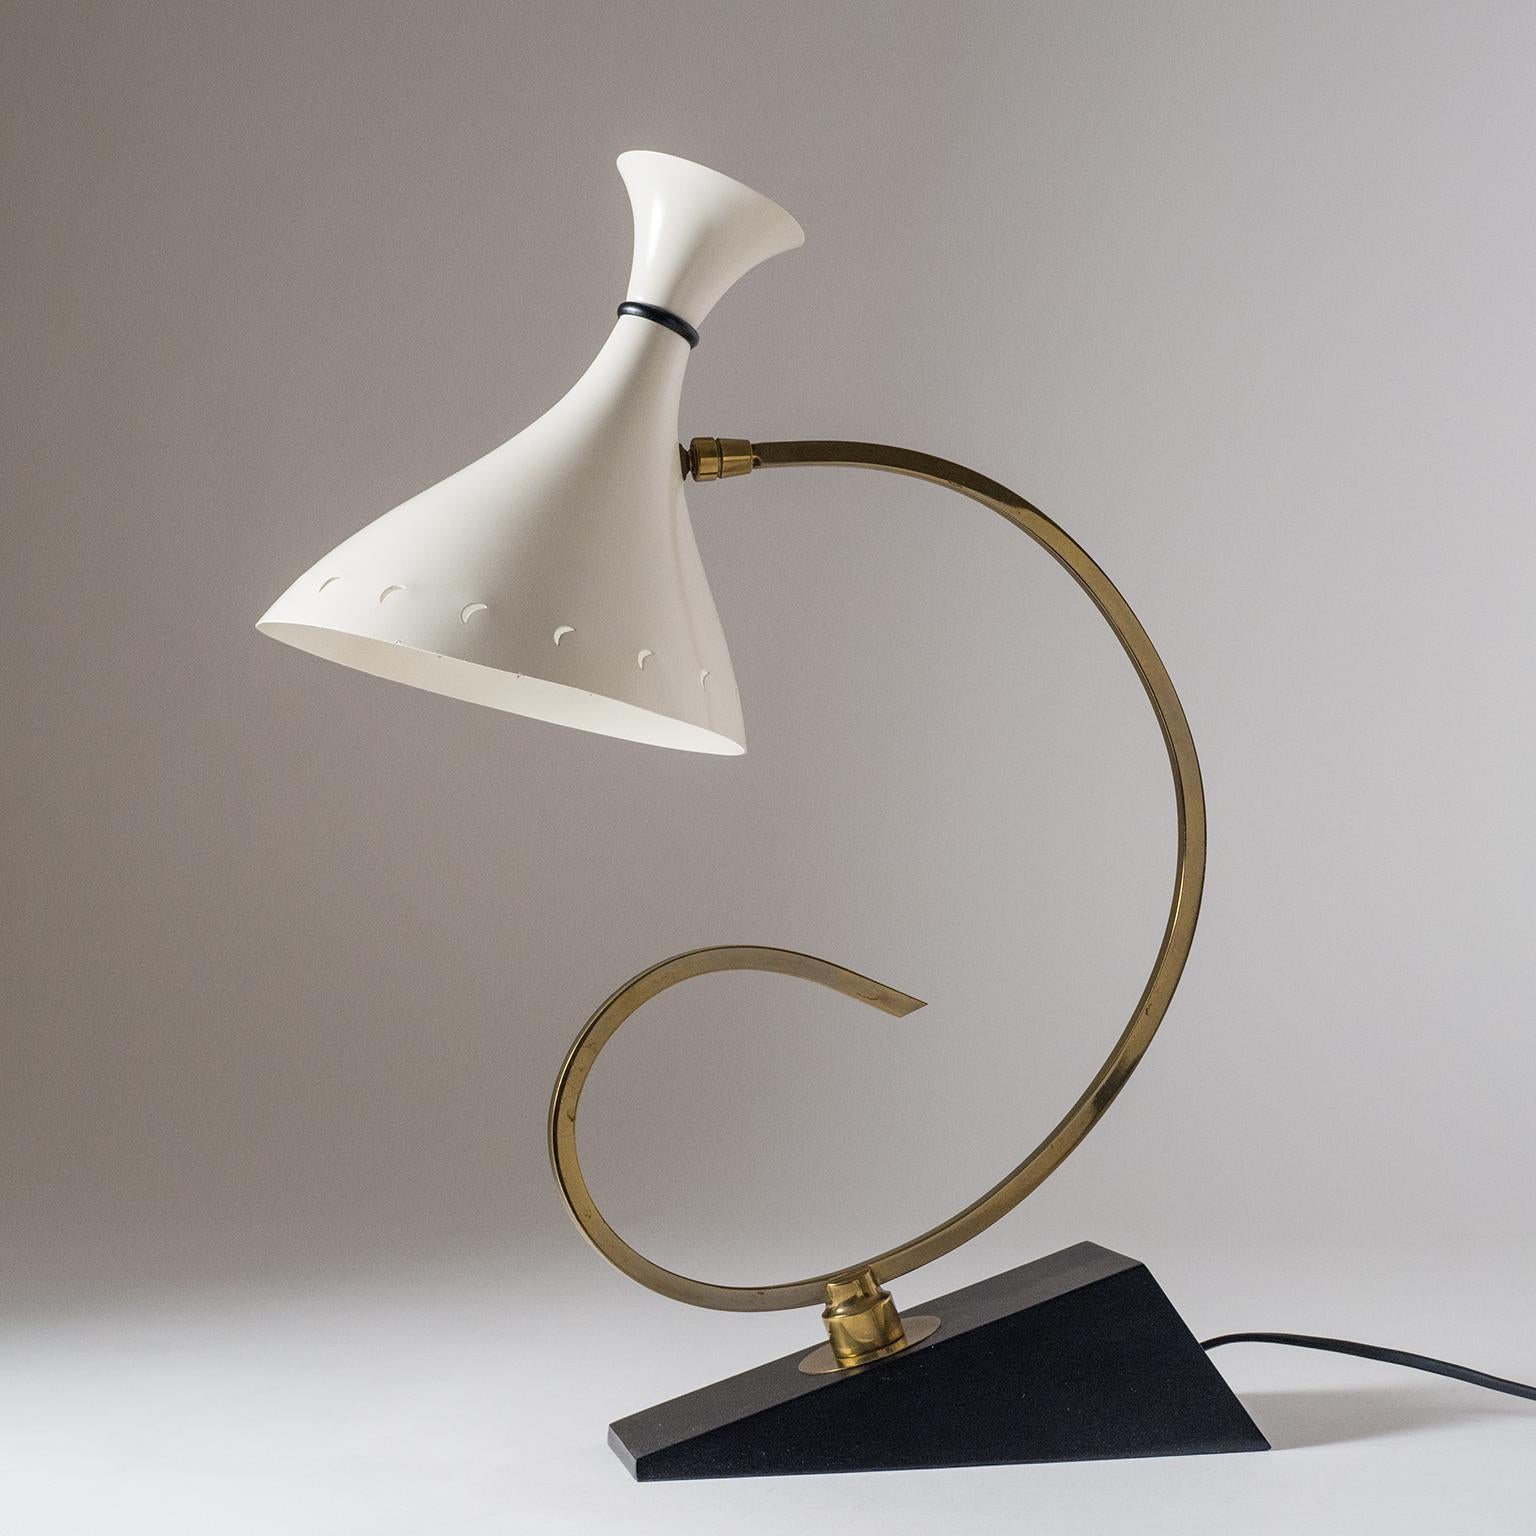 Very unique French midcentury table or desk lamp. An angular cast aluminum base, a uniquely sculpted brass stem, and a sensuous double-cone aluminum shade with rare moon shaped cut-outs. One brass and ceramic E27 socket with new wiring.